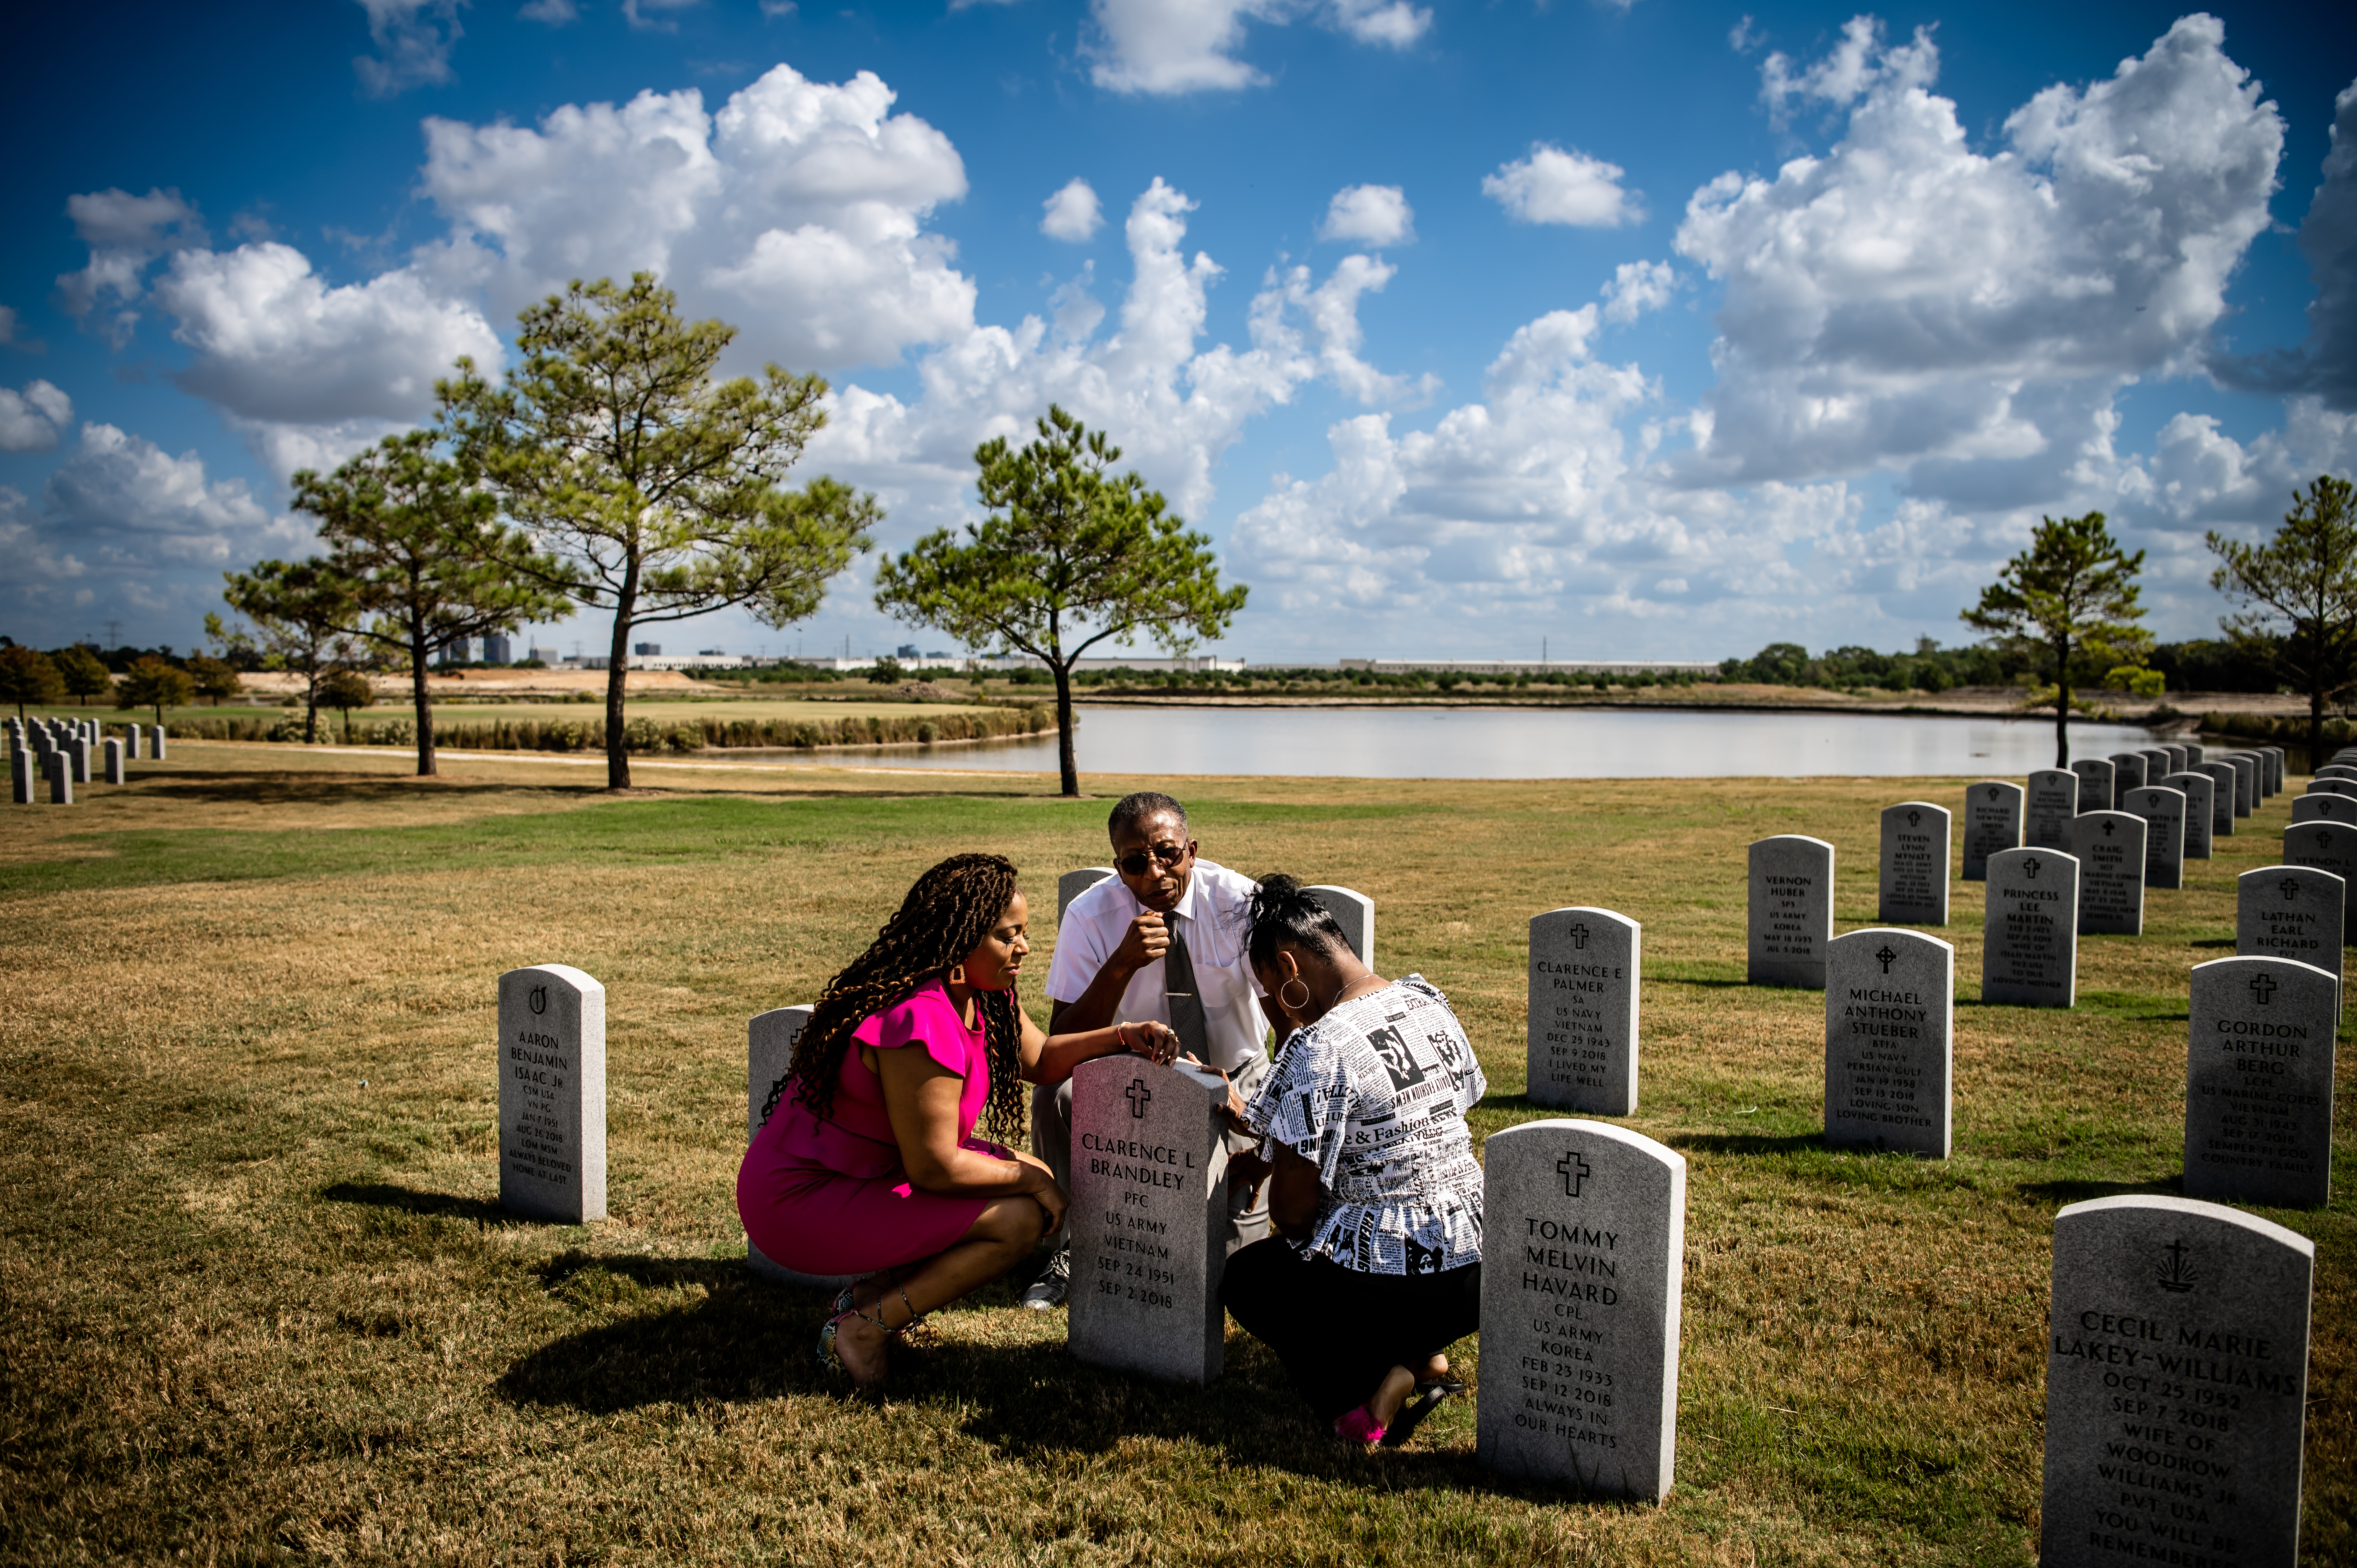 A Black family, Ozell Brandley and his nieces, Cassie Brandley and Elizabeth Phillips, pray together at the grave of his brother and the women’s father, Clarence Brandley. The graves extend away in orderly rows on a clipped lawn under a big partly cloudy Texas sky.